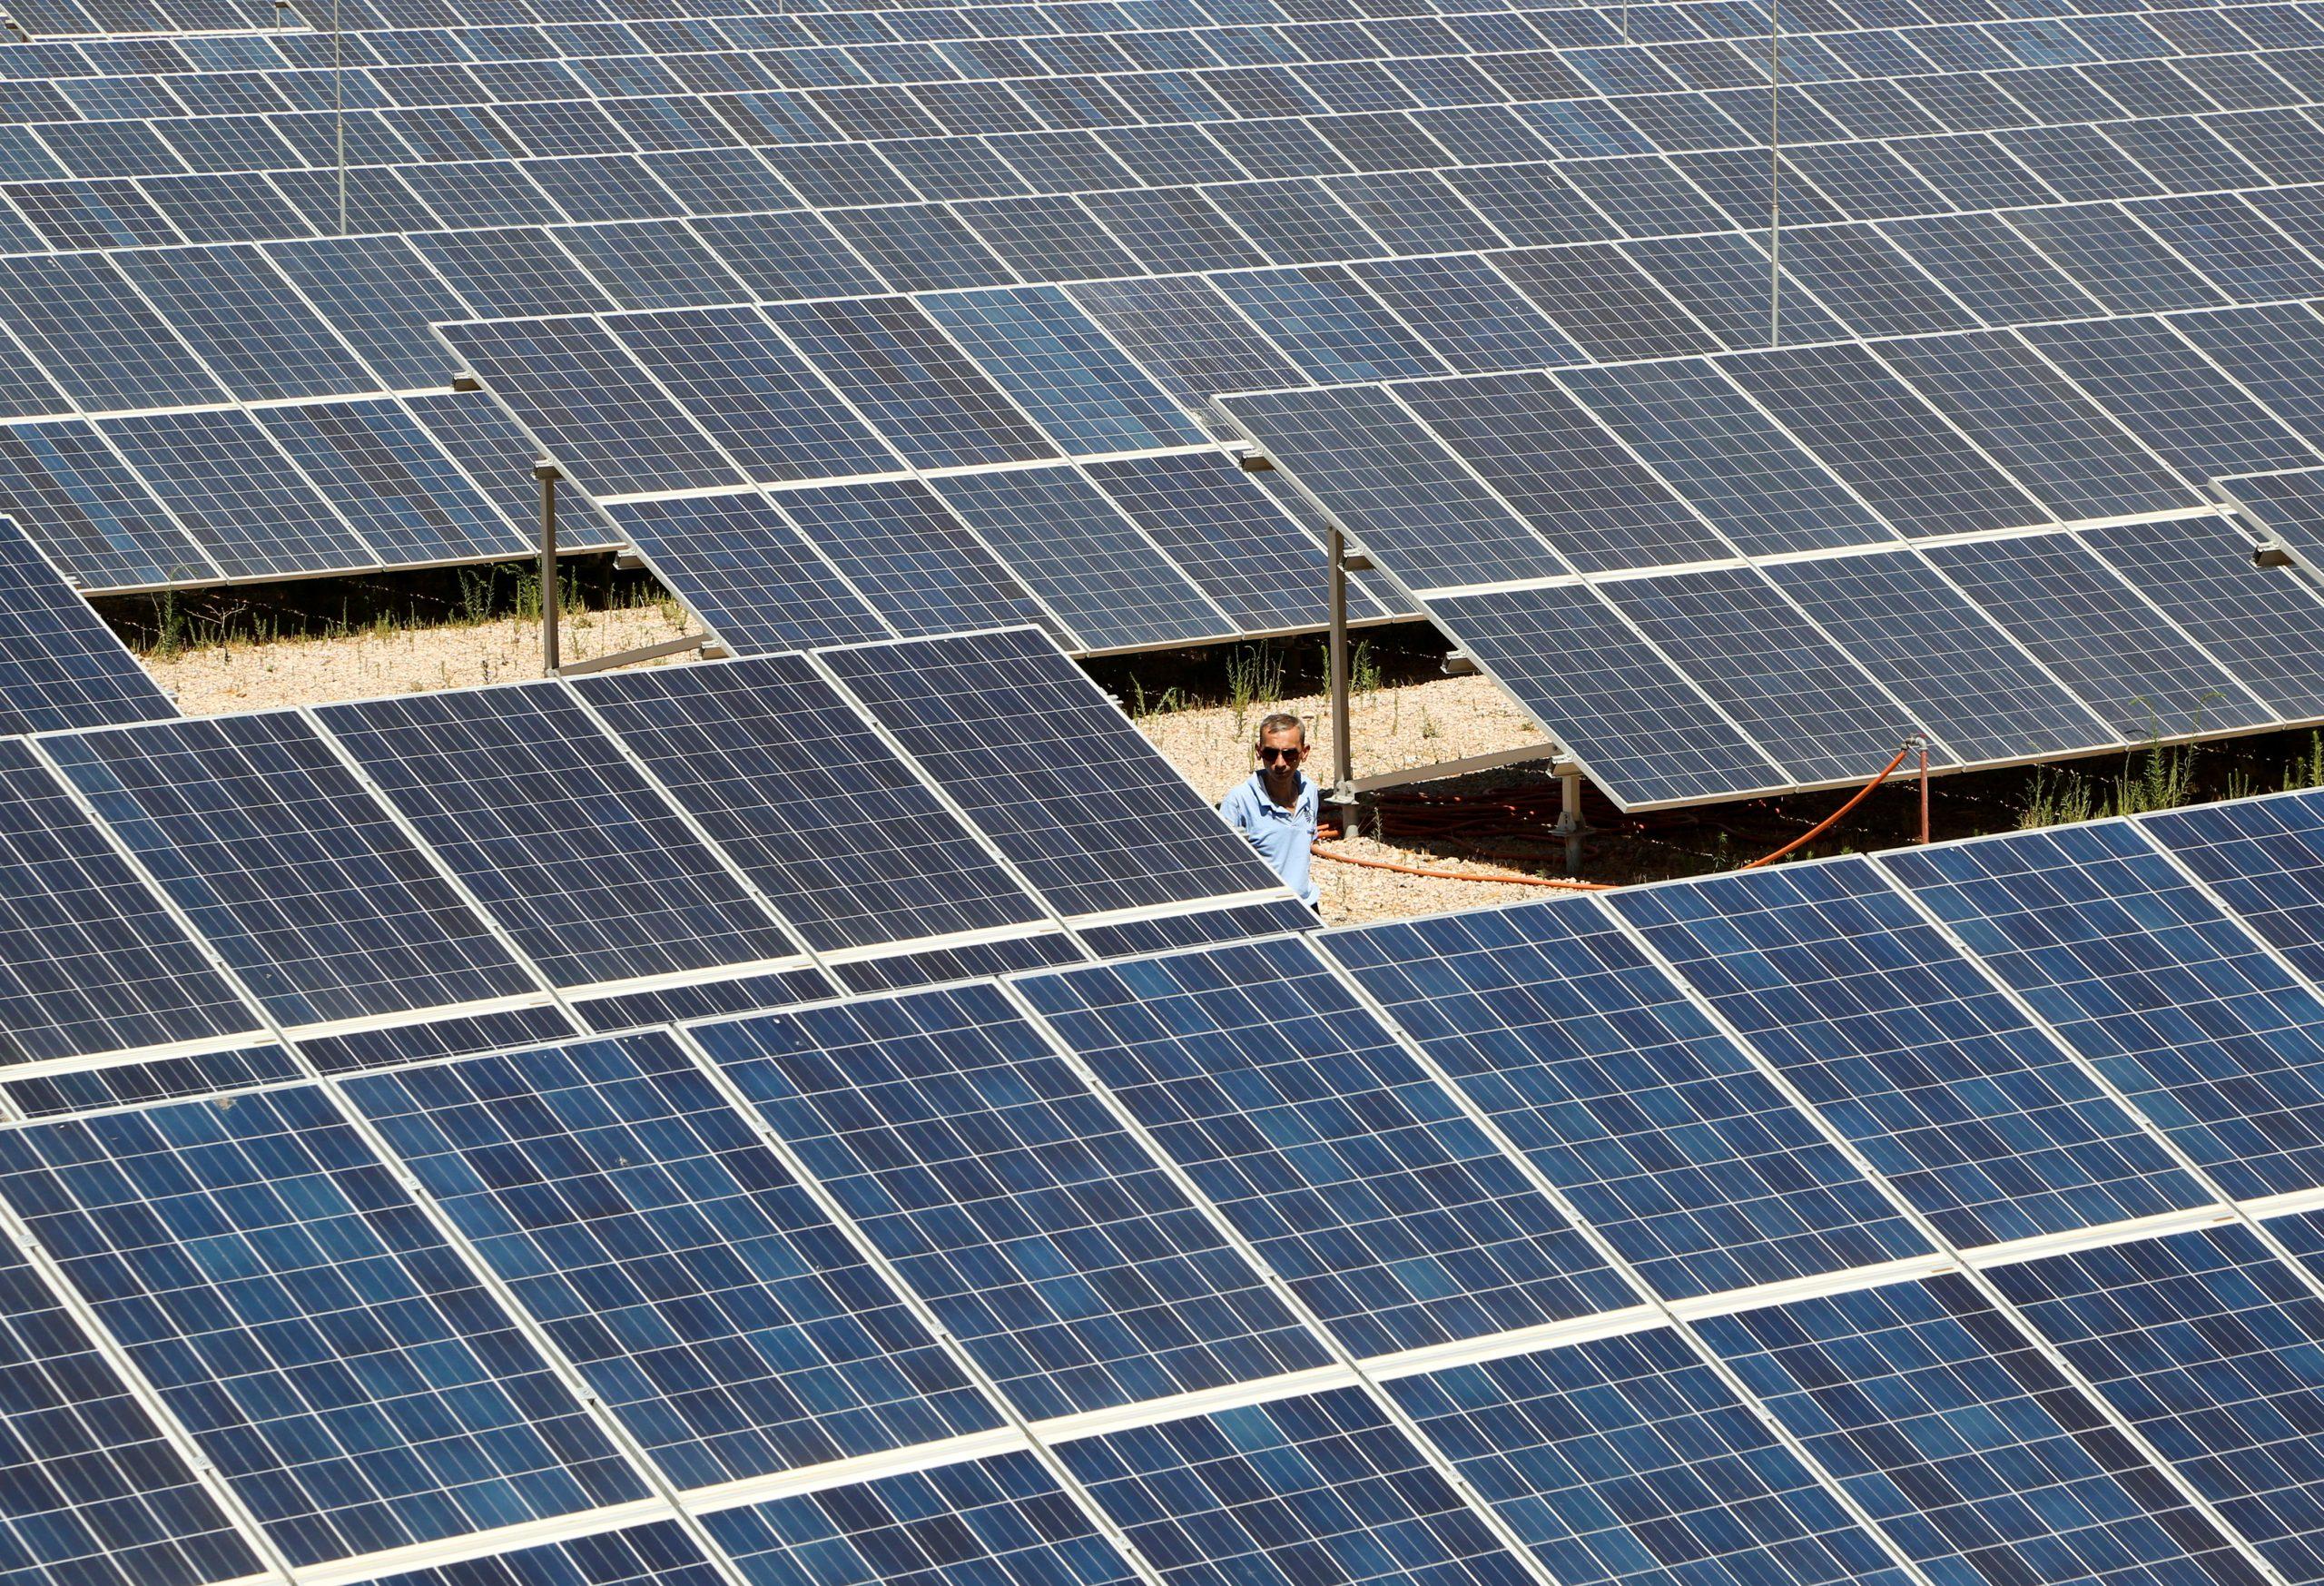 A worker walks past solar panels at a photovoltaic power plant in Kiswah, Syria, in this Sept 8 file photo. Malaysia, Vietnam and Thailand account for 80% of all panel imports into the US. Photo: Reuters